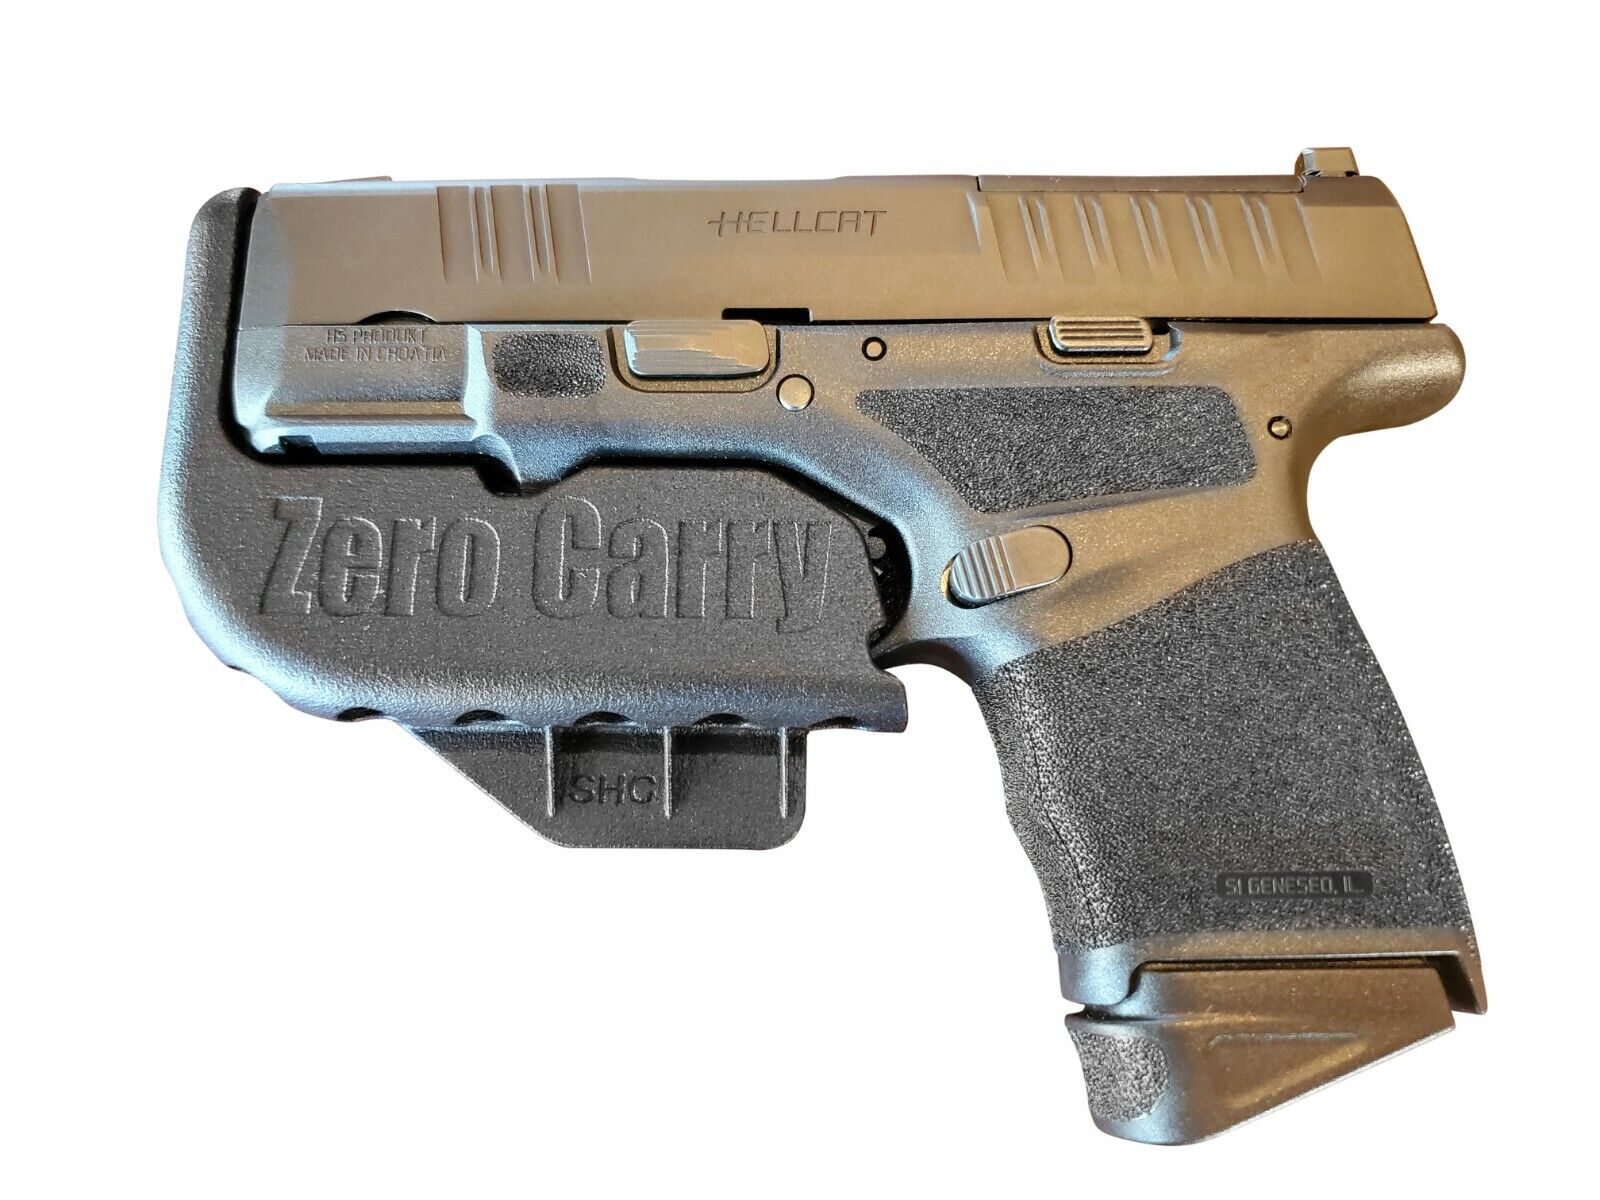 Springfield Hellcat Zero Carry Elite In Waistband Holster for concealed carry